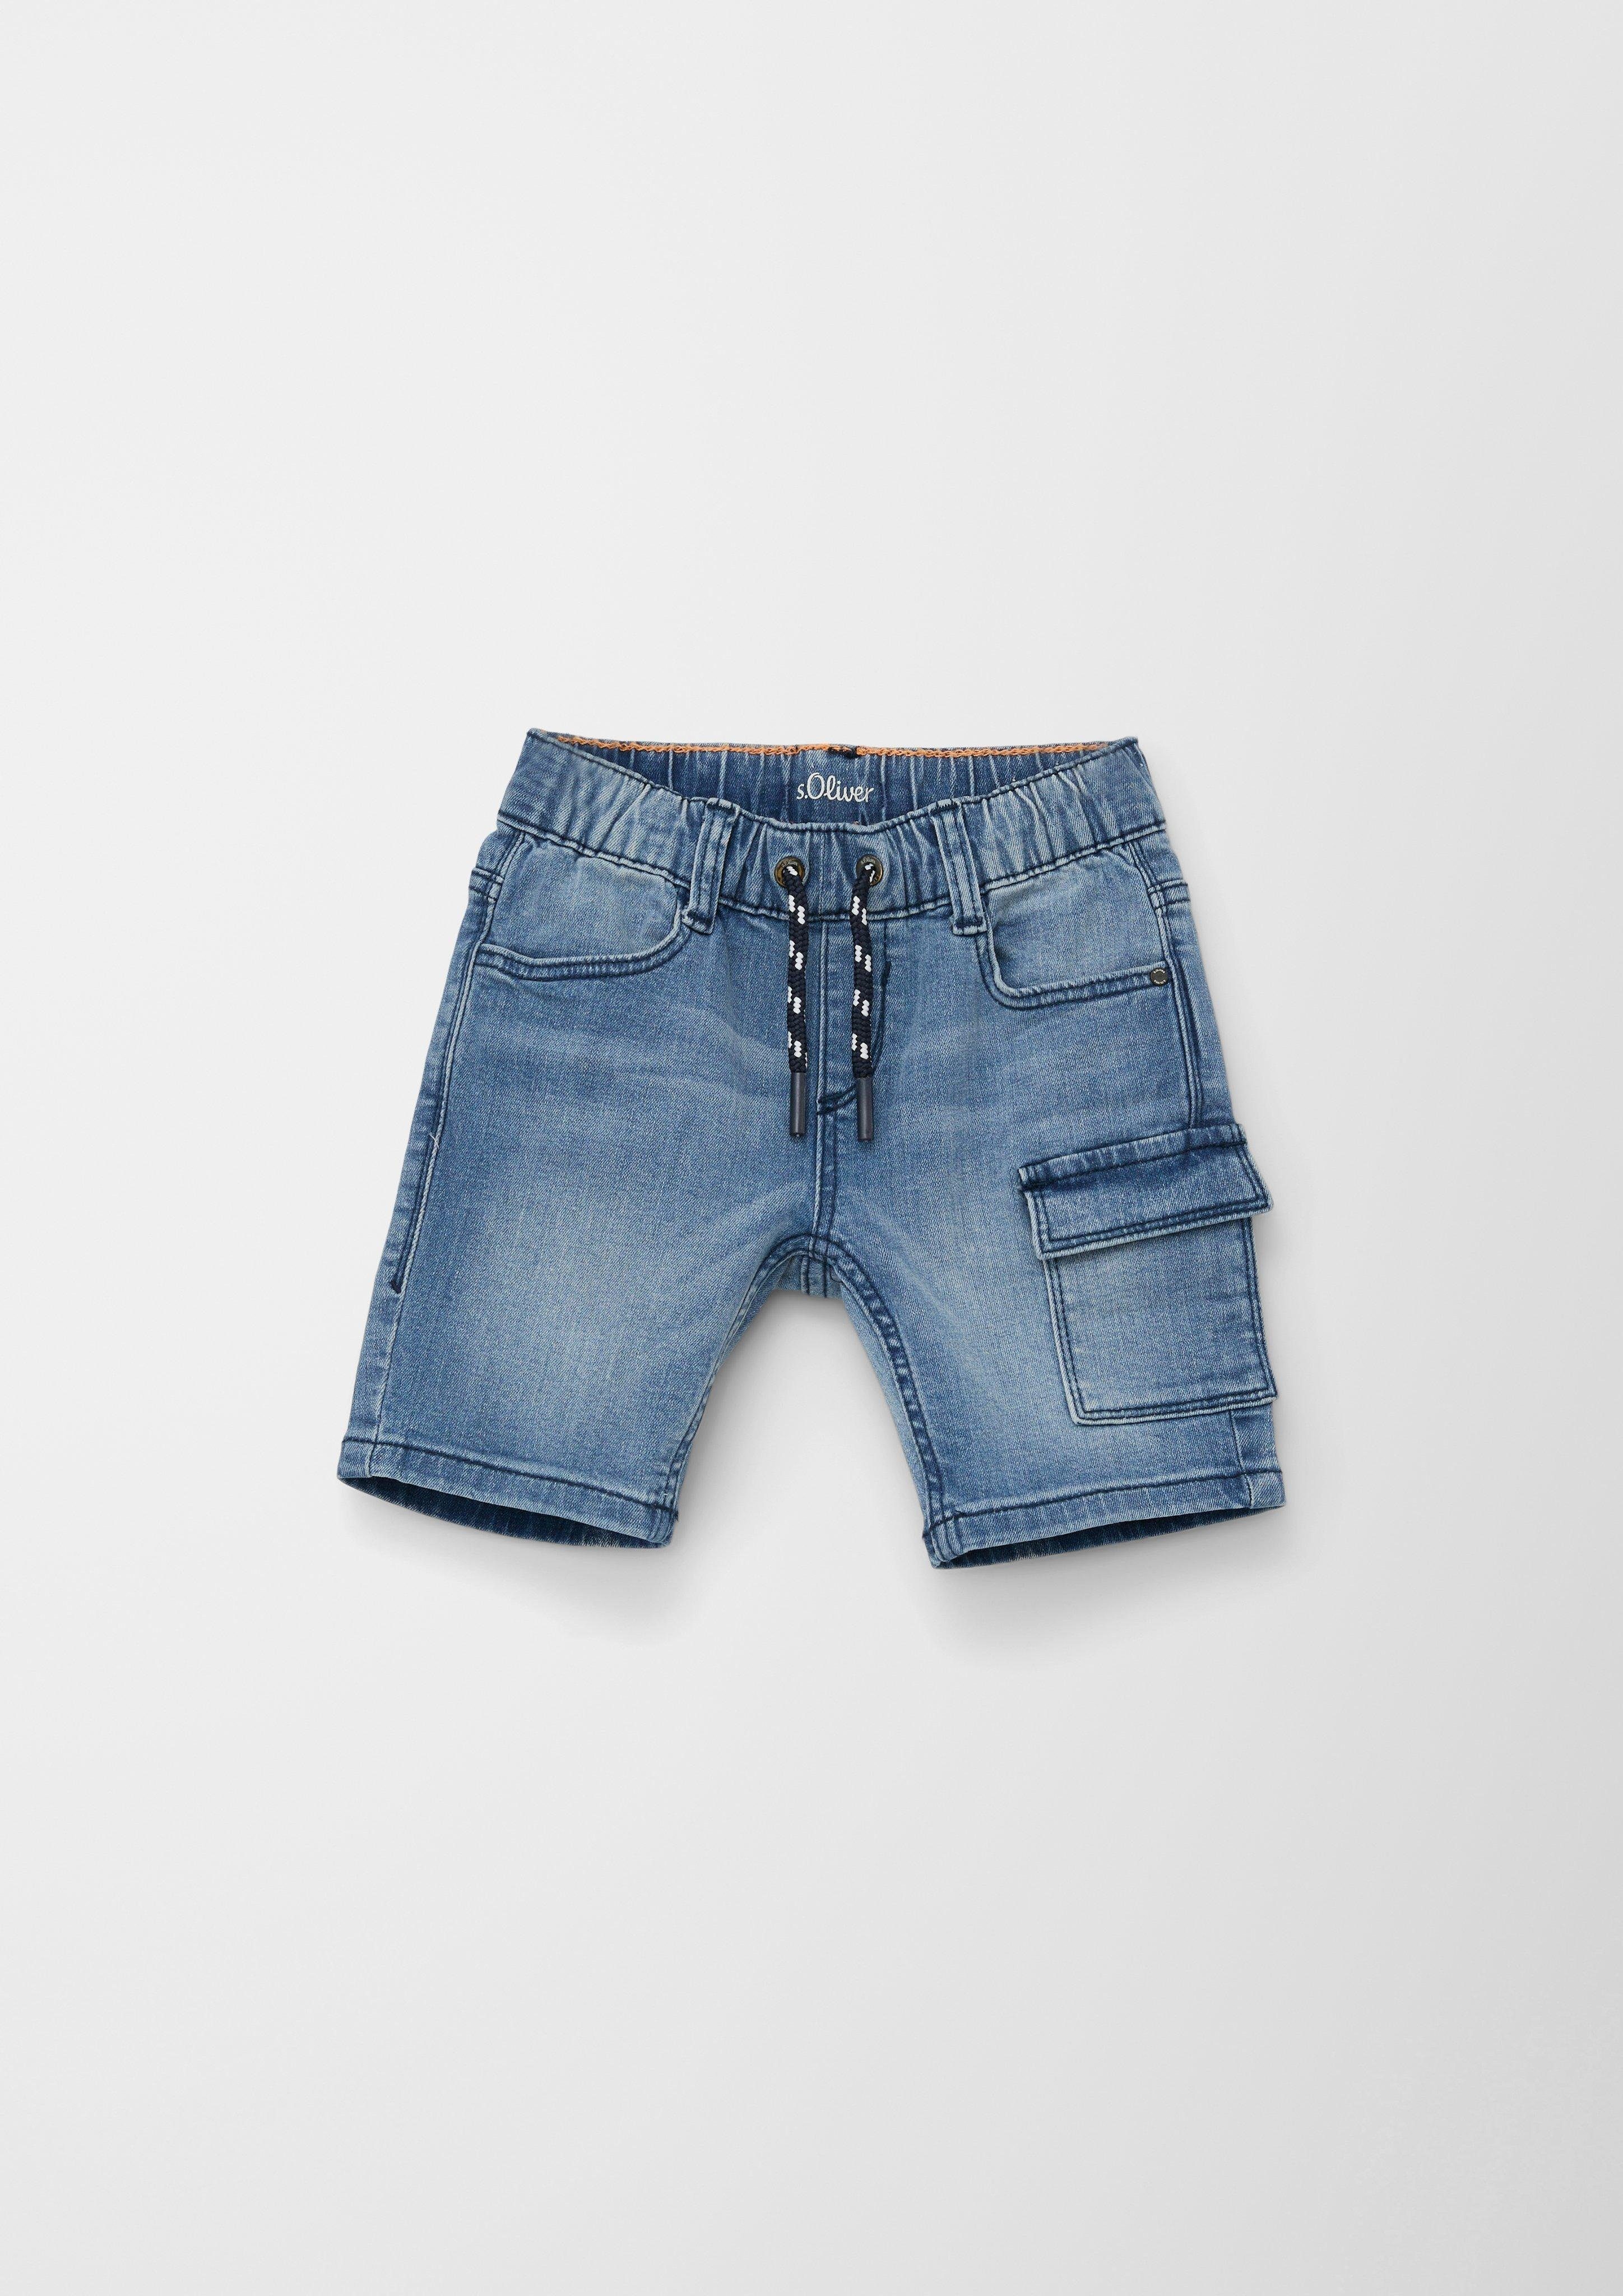 / s.Oliver angedeuteter Tunnelzug, Joggstyle Leg Jeans-Bermuda Fit / Slim Rise Jeansshorts Slim / Brad Waschung Mid